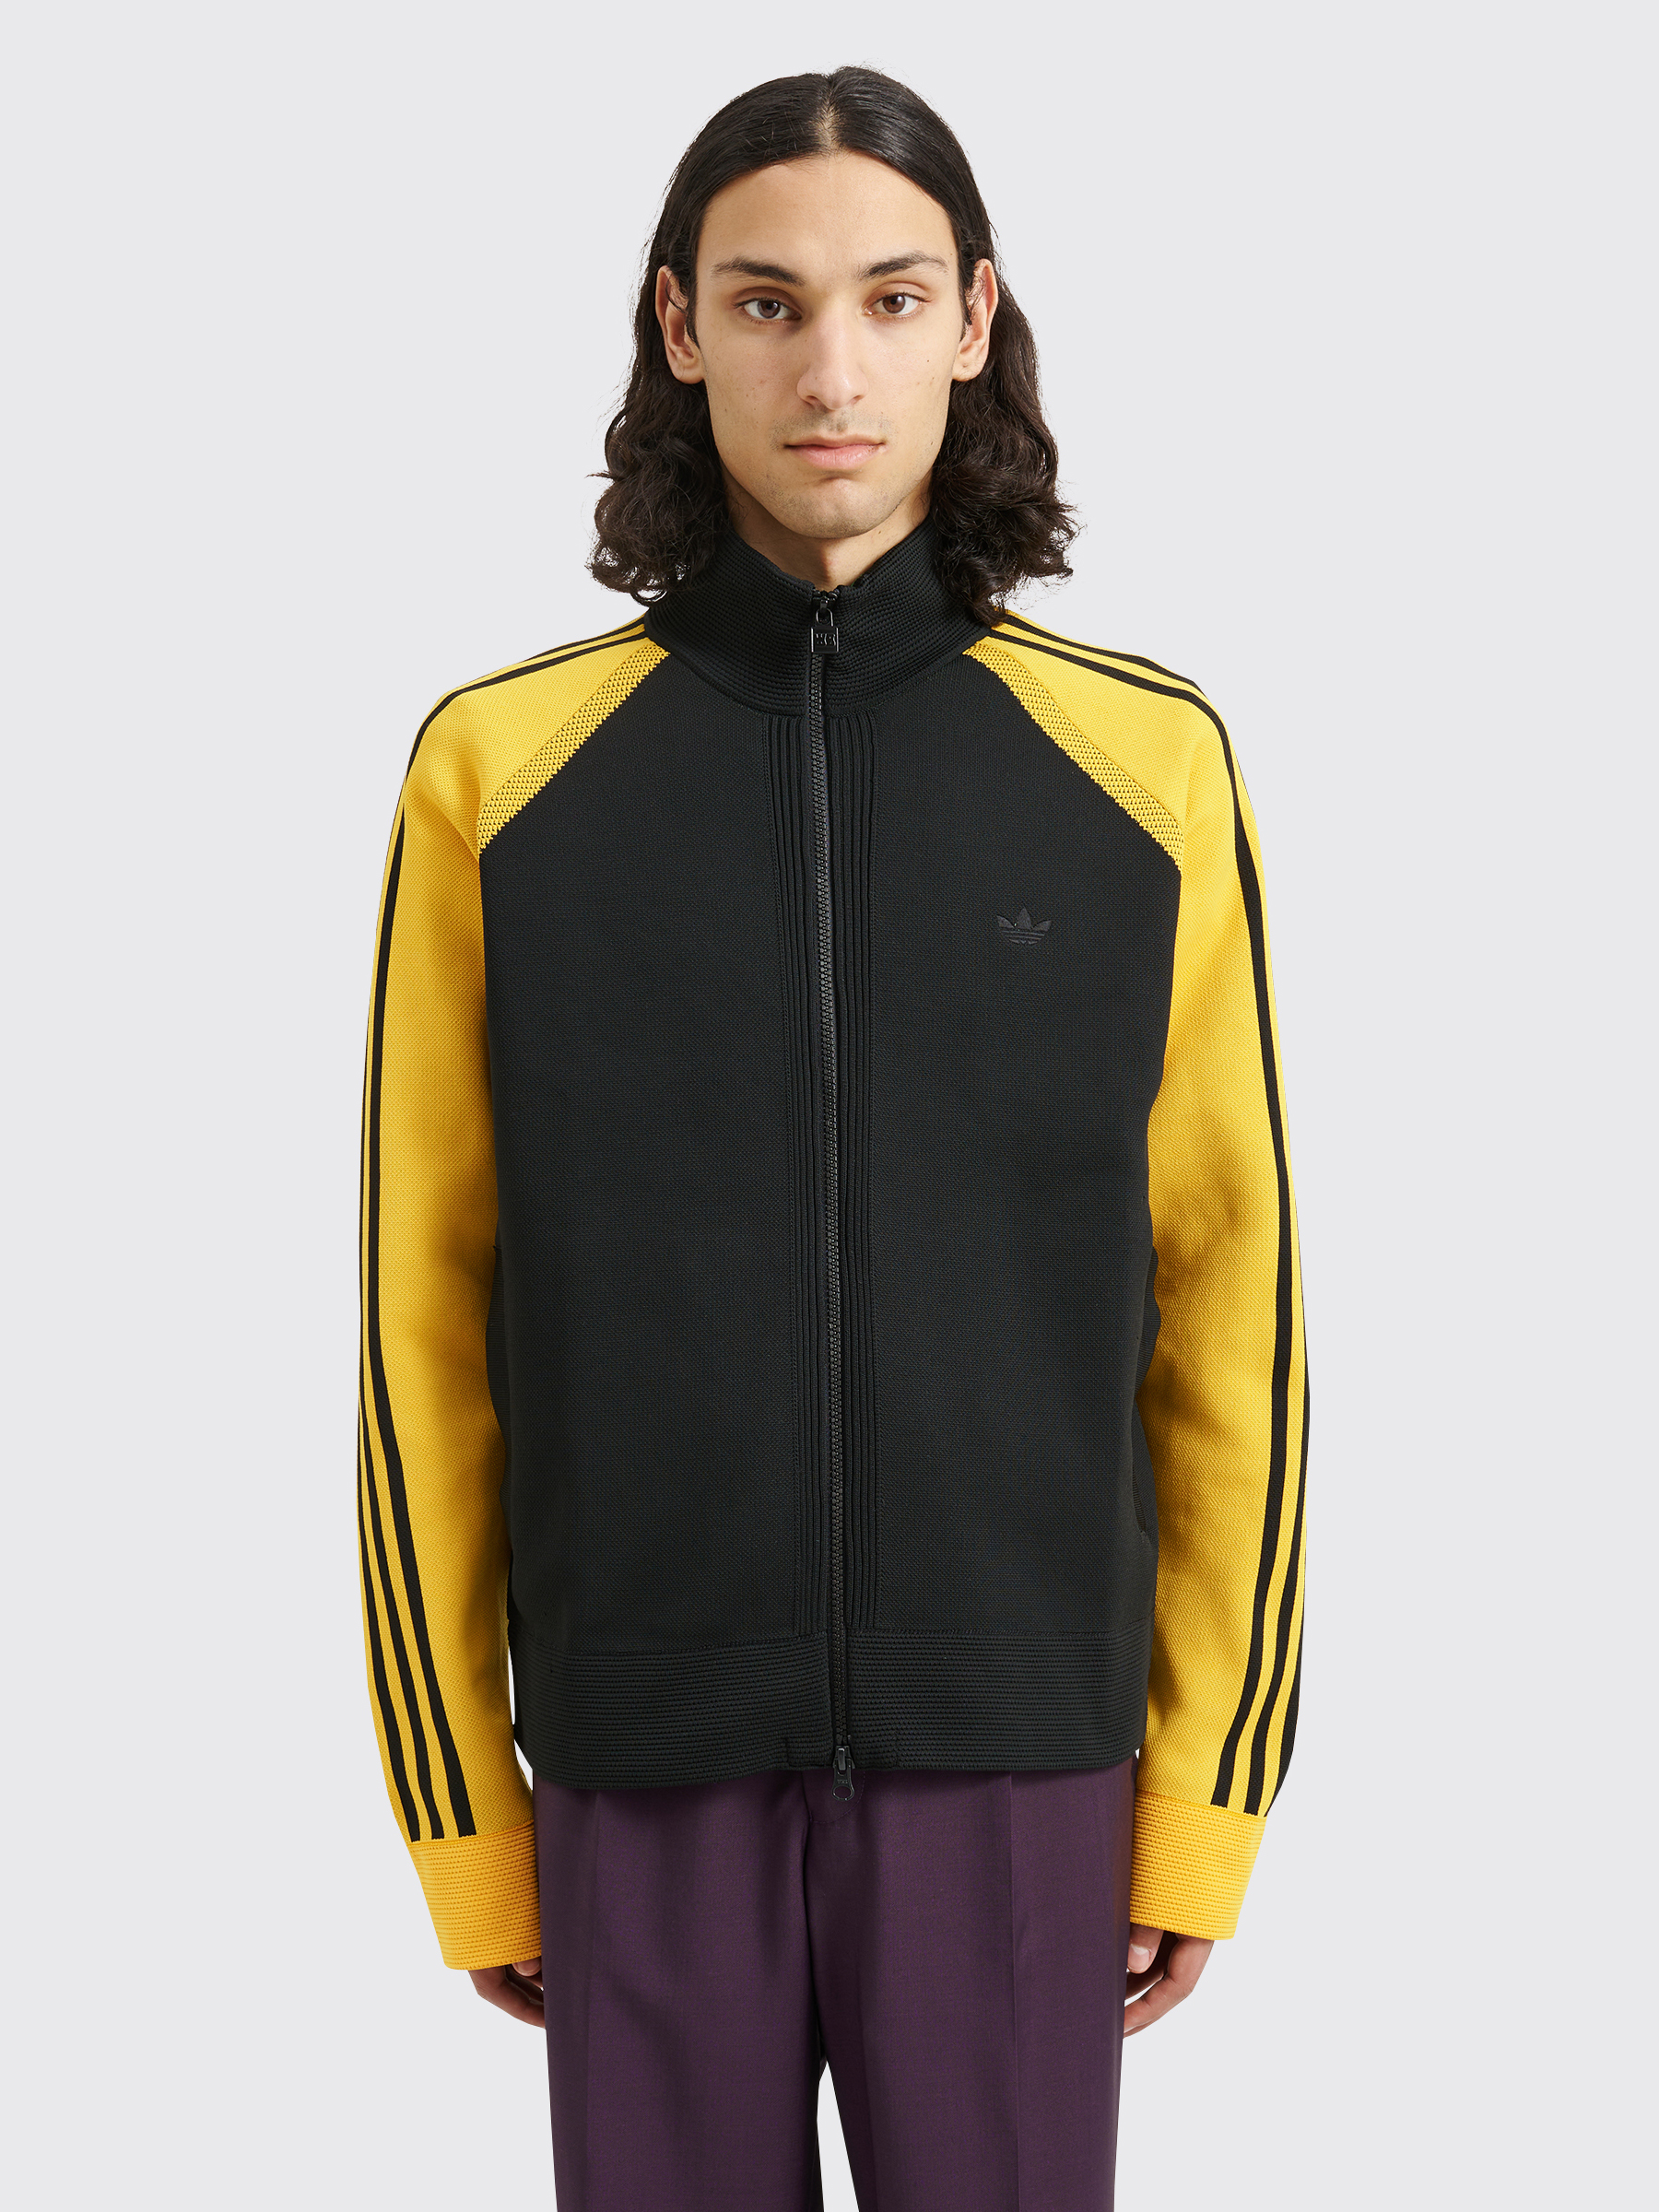 Adidas x Wales Bonner Men's Logo-embroidered Striped Track Top